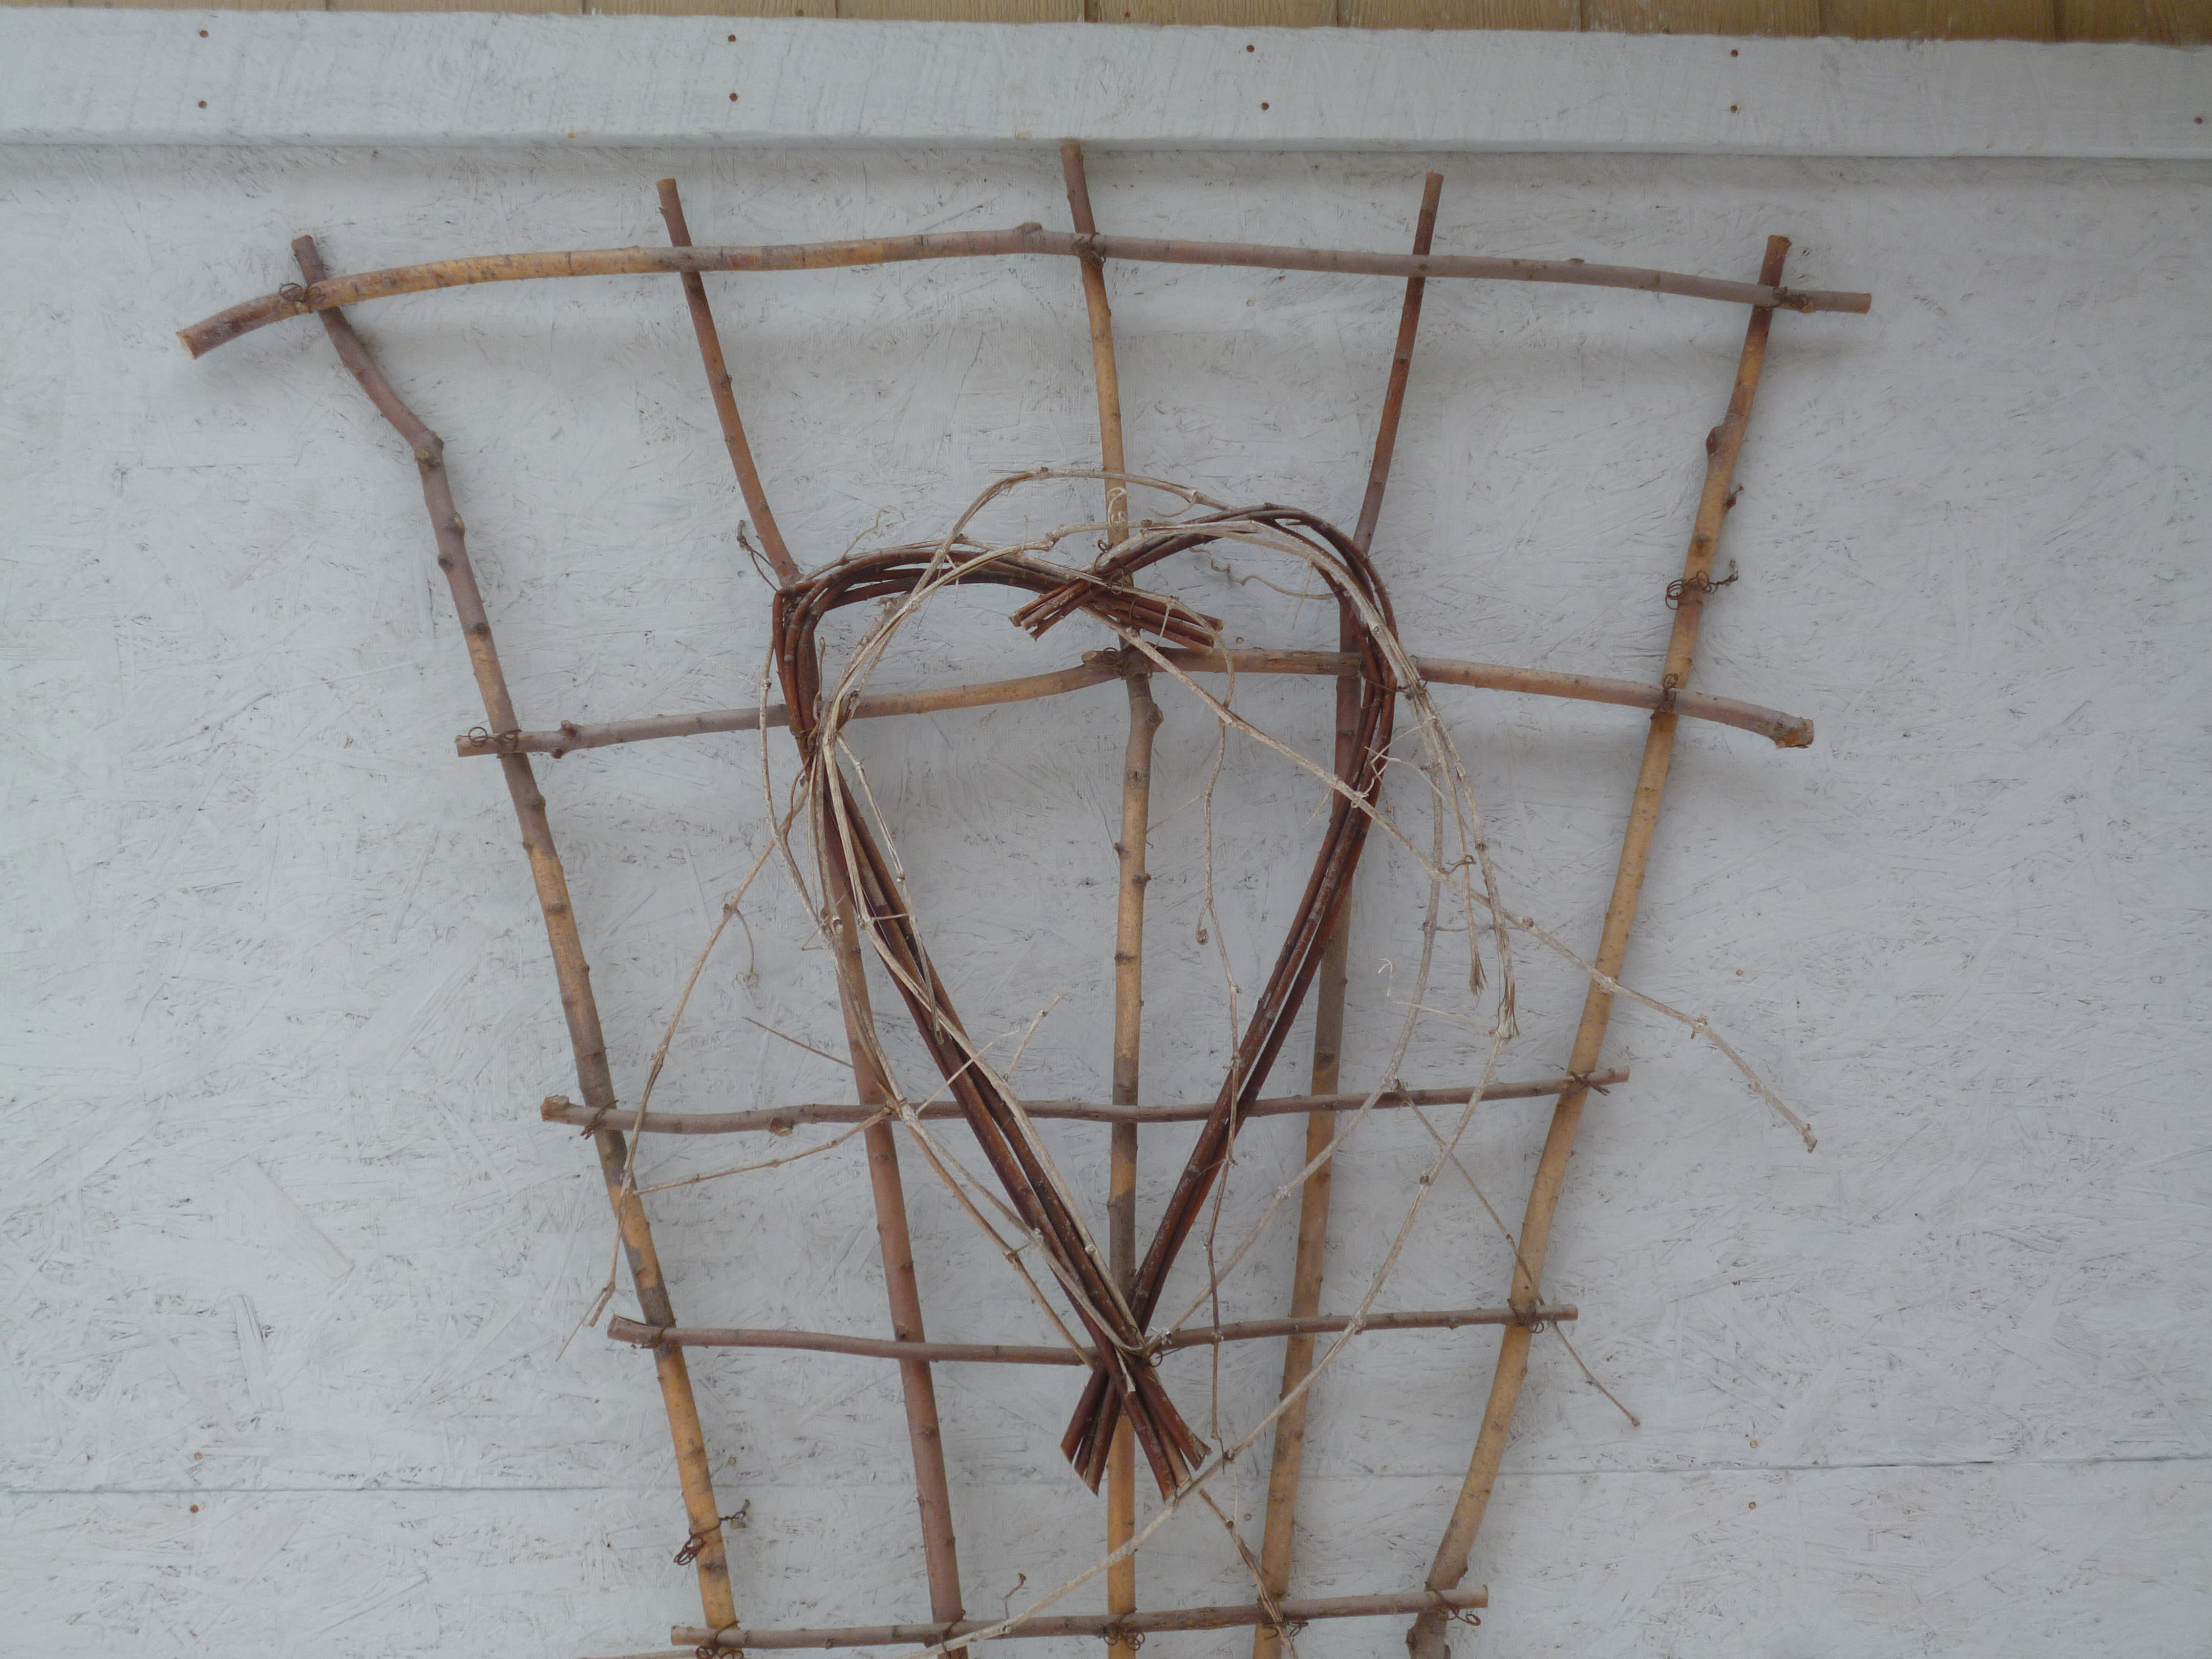 Twig Crafts - primitive, natural art made with branches and twigs